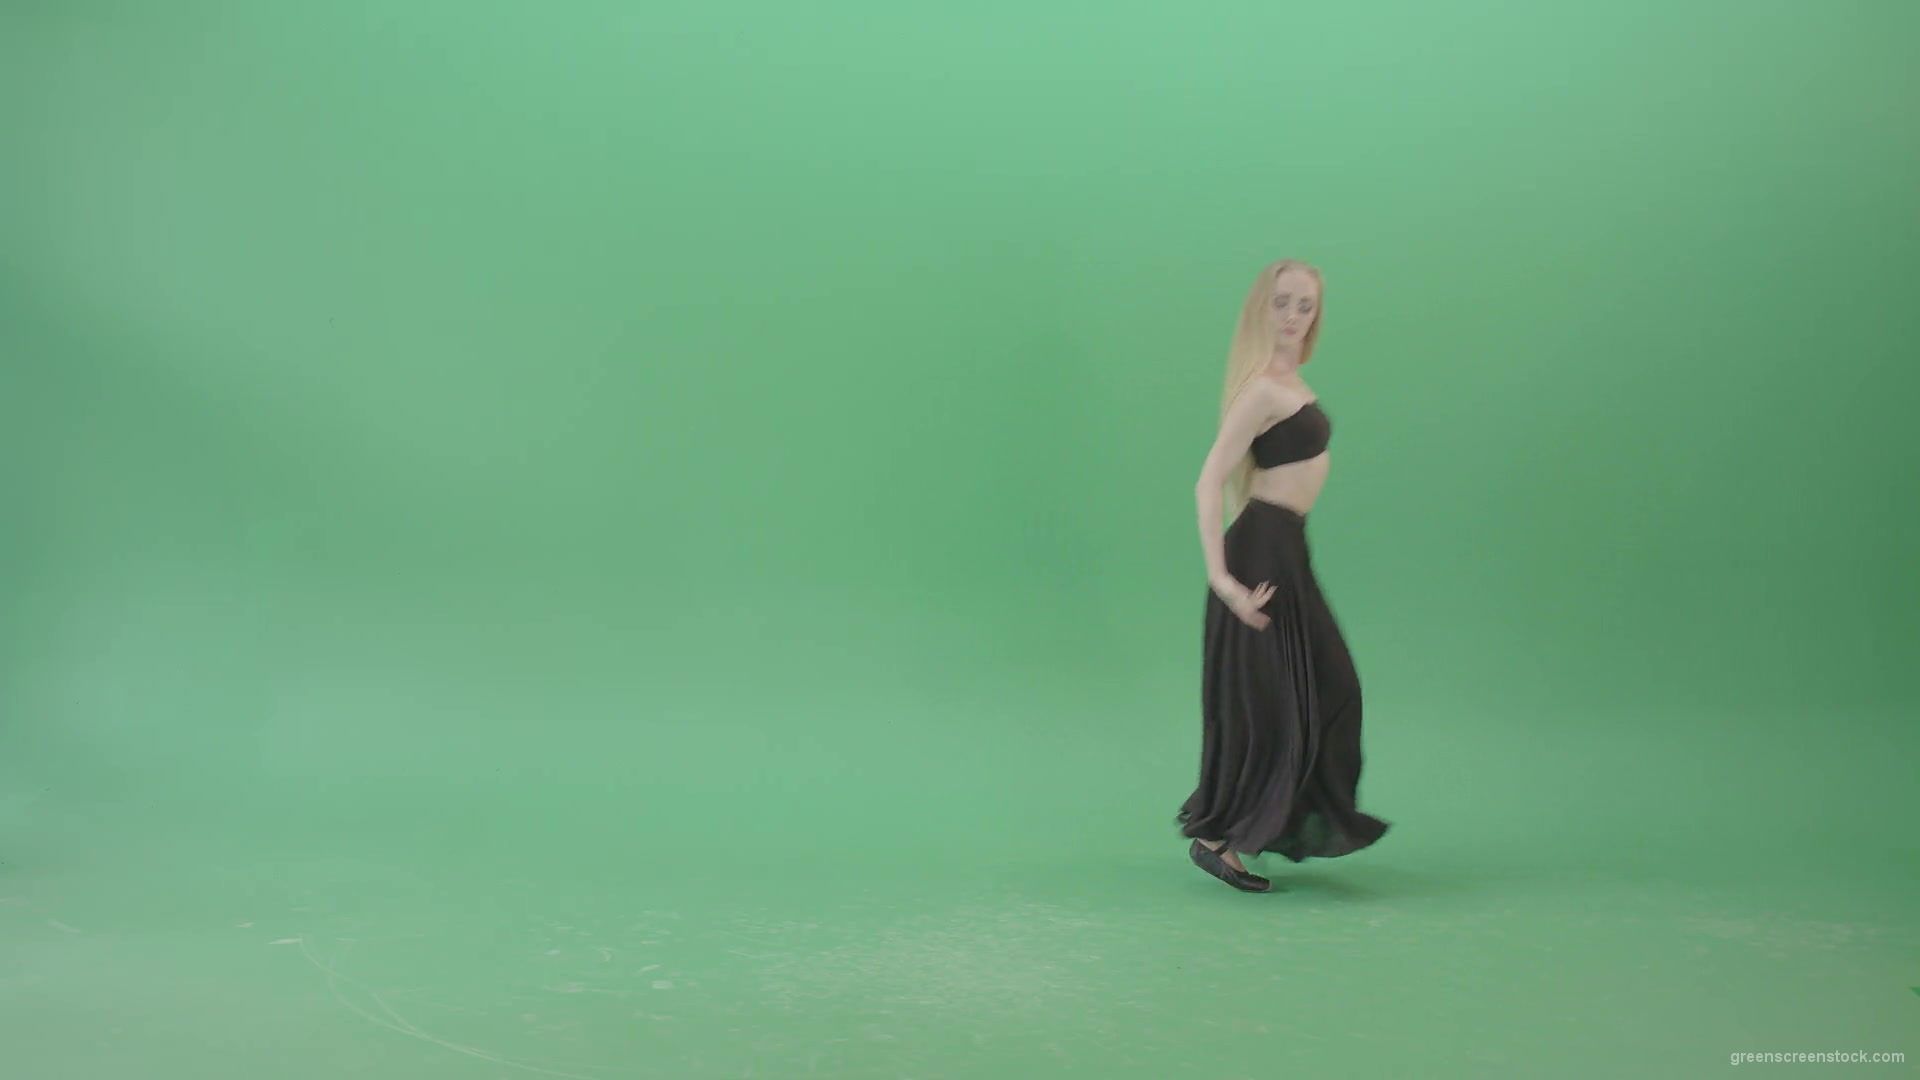 Hot-passion-ballet-girl-in-black-dress-dancing-on-green-screen-4K-Video-Footage-1920_002 Green Screen Stock